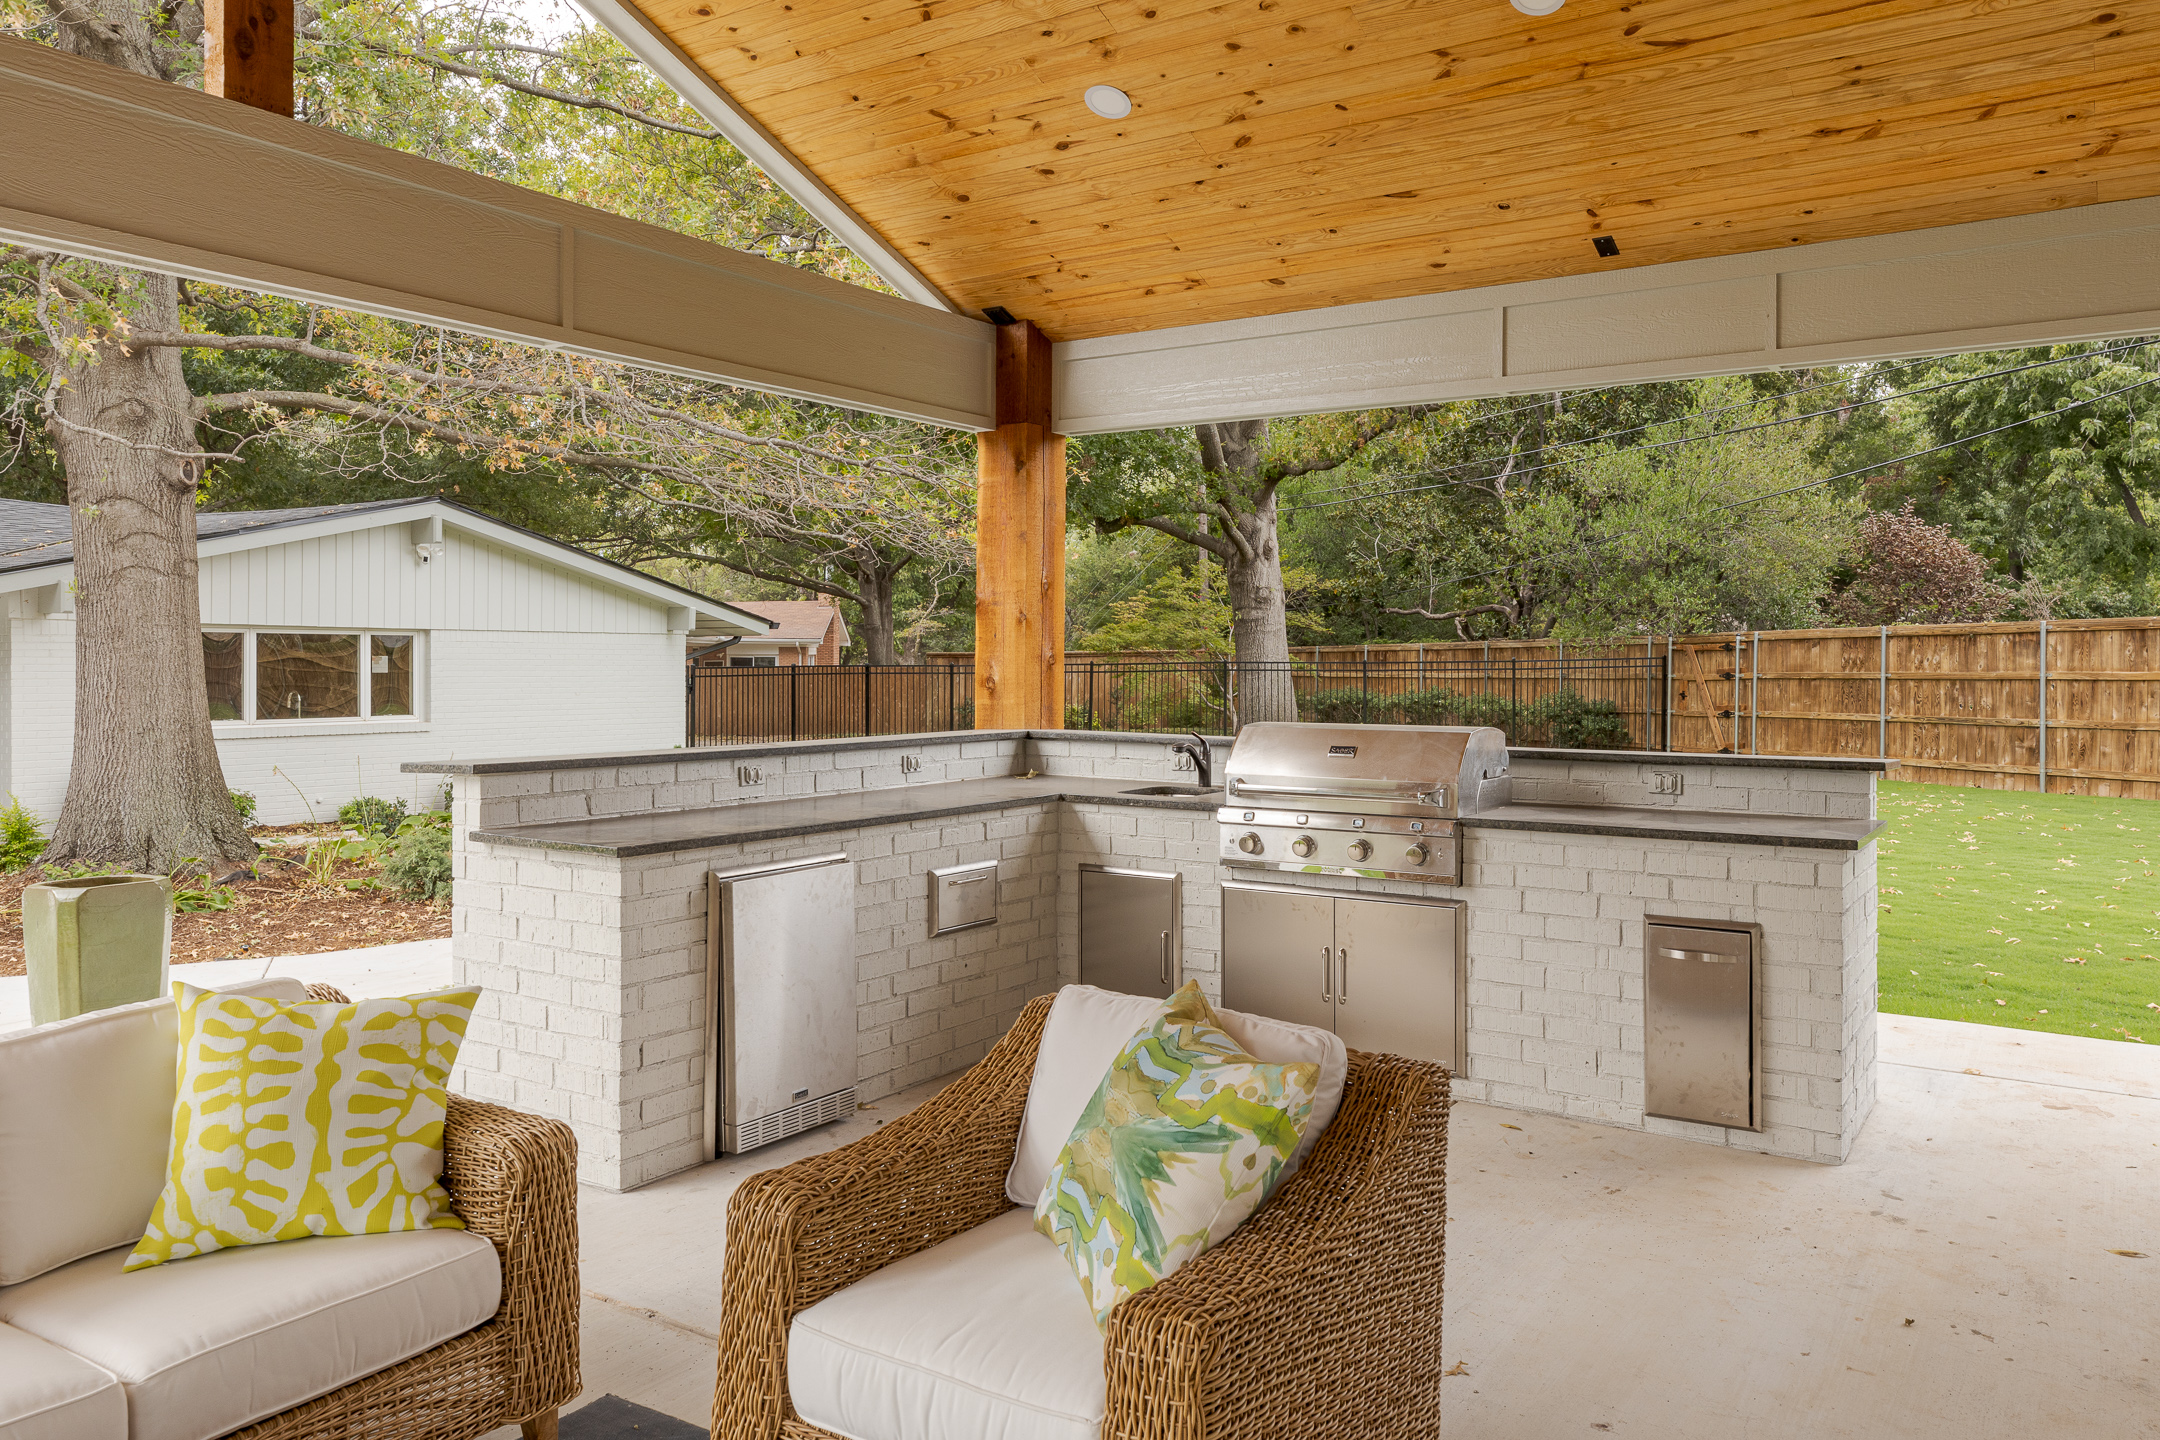 Outdoor living room and kitchen from interior Brent Swift and SwiftCo in Norman, Oklahoma. Purpose is to show our quality of work.